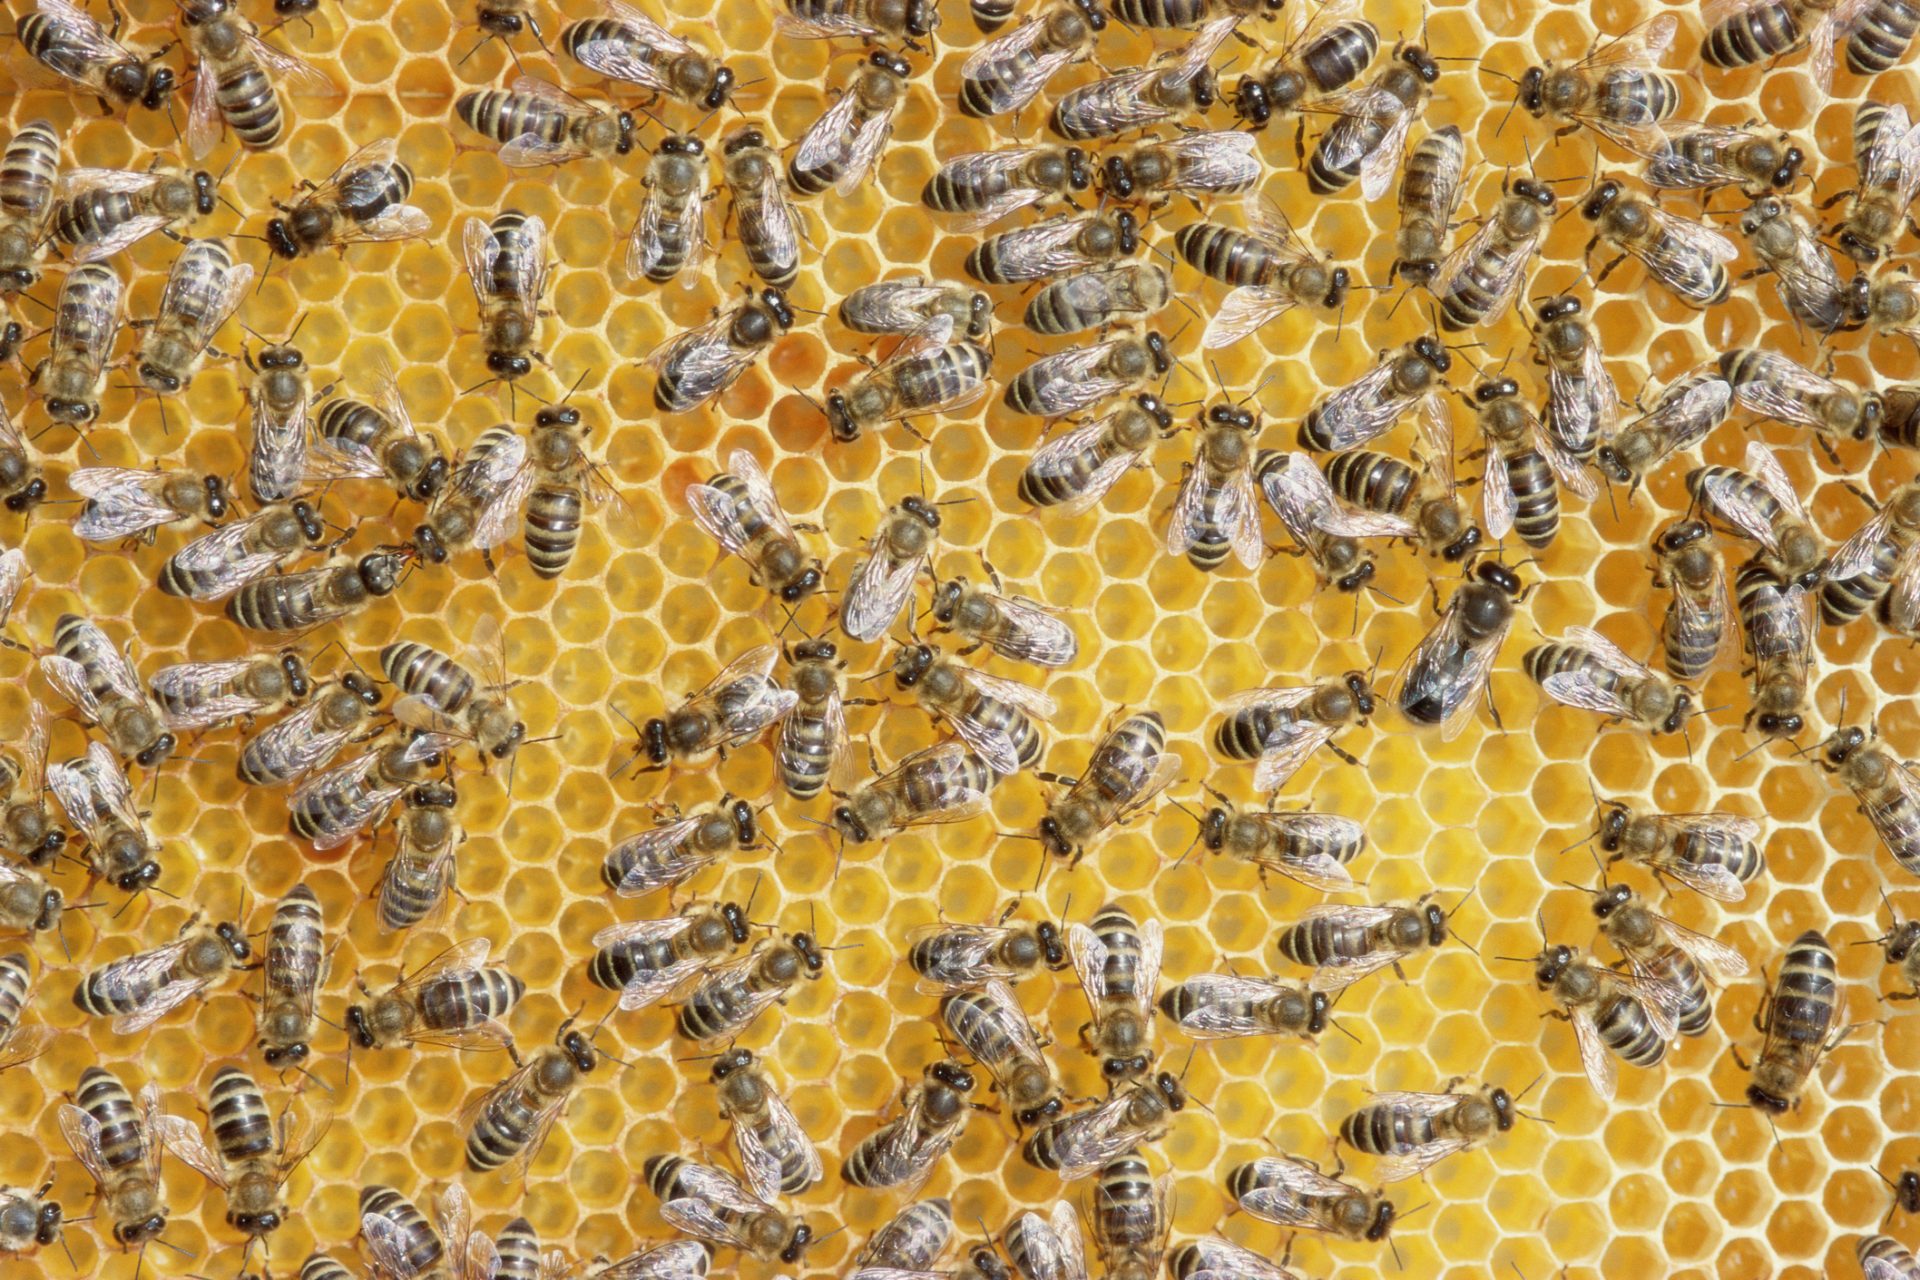 Bee populations buzzing to silence in the United States